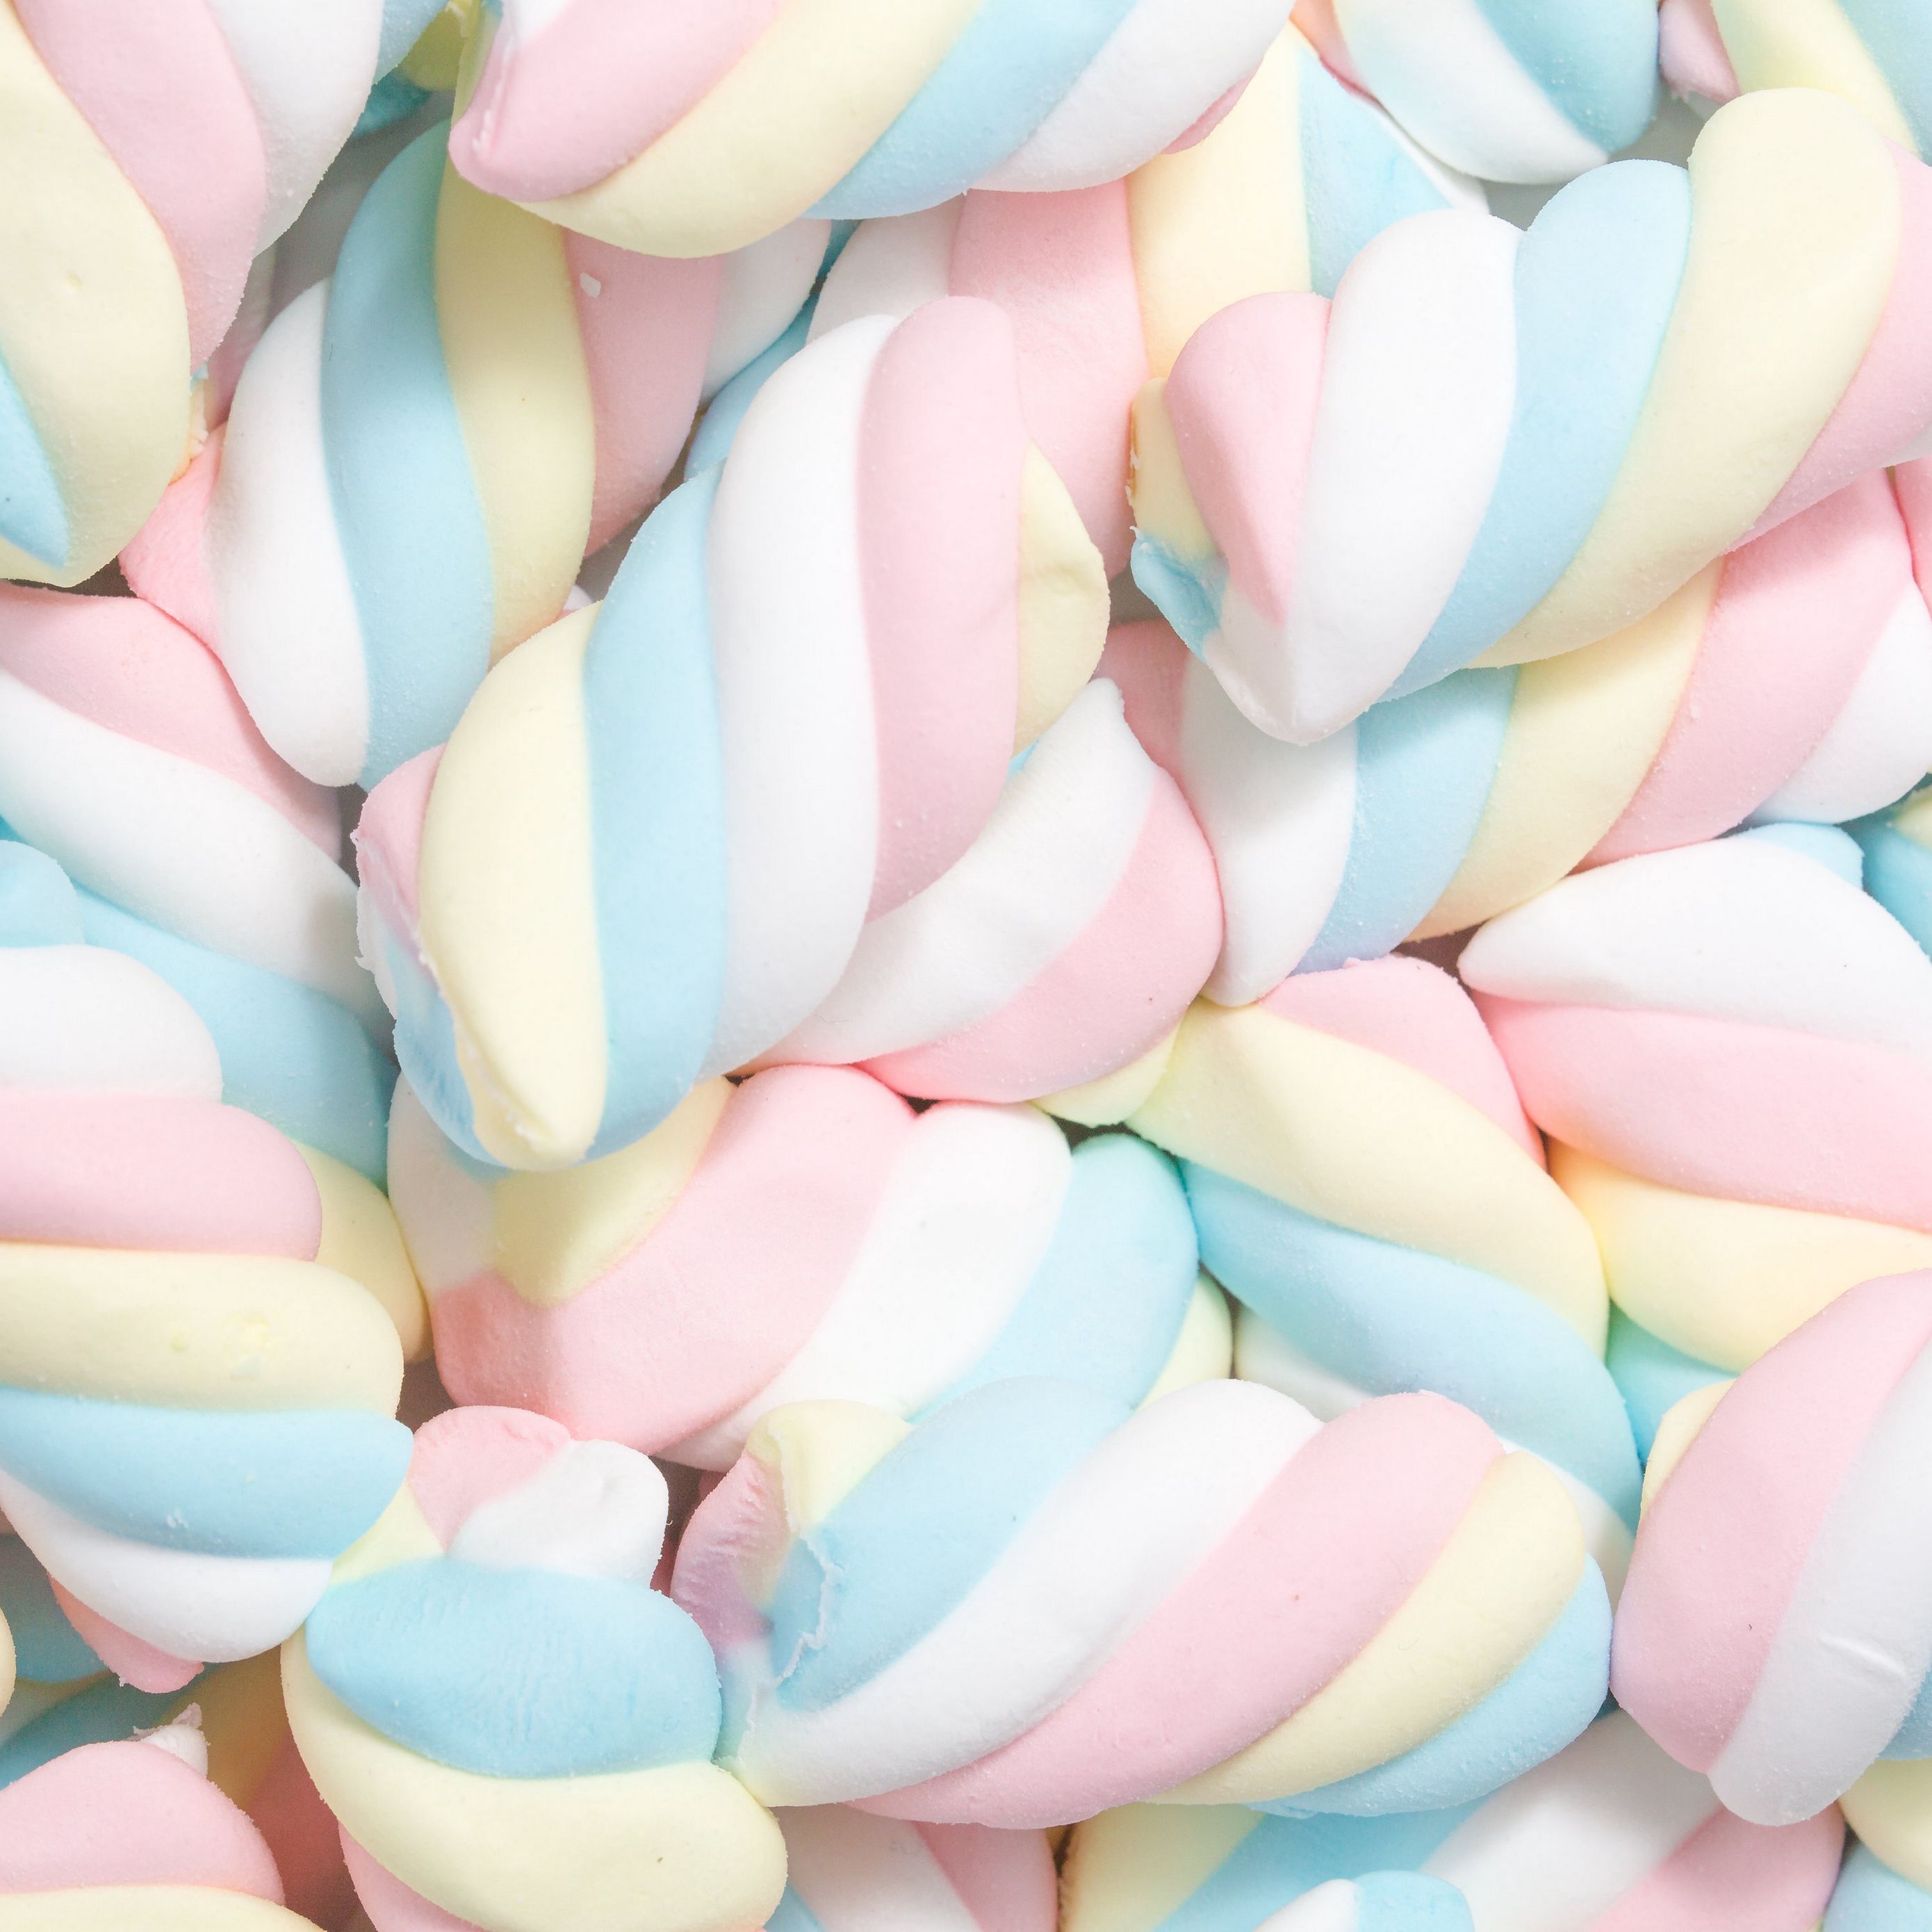 A pile of marshmallows in different colors - Candy, marshmallows